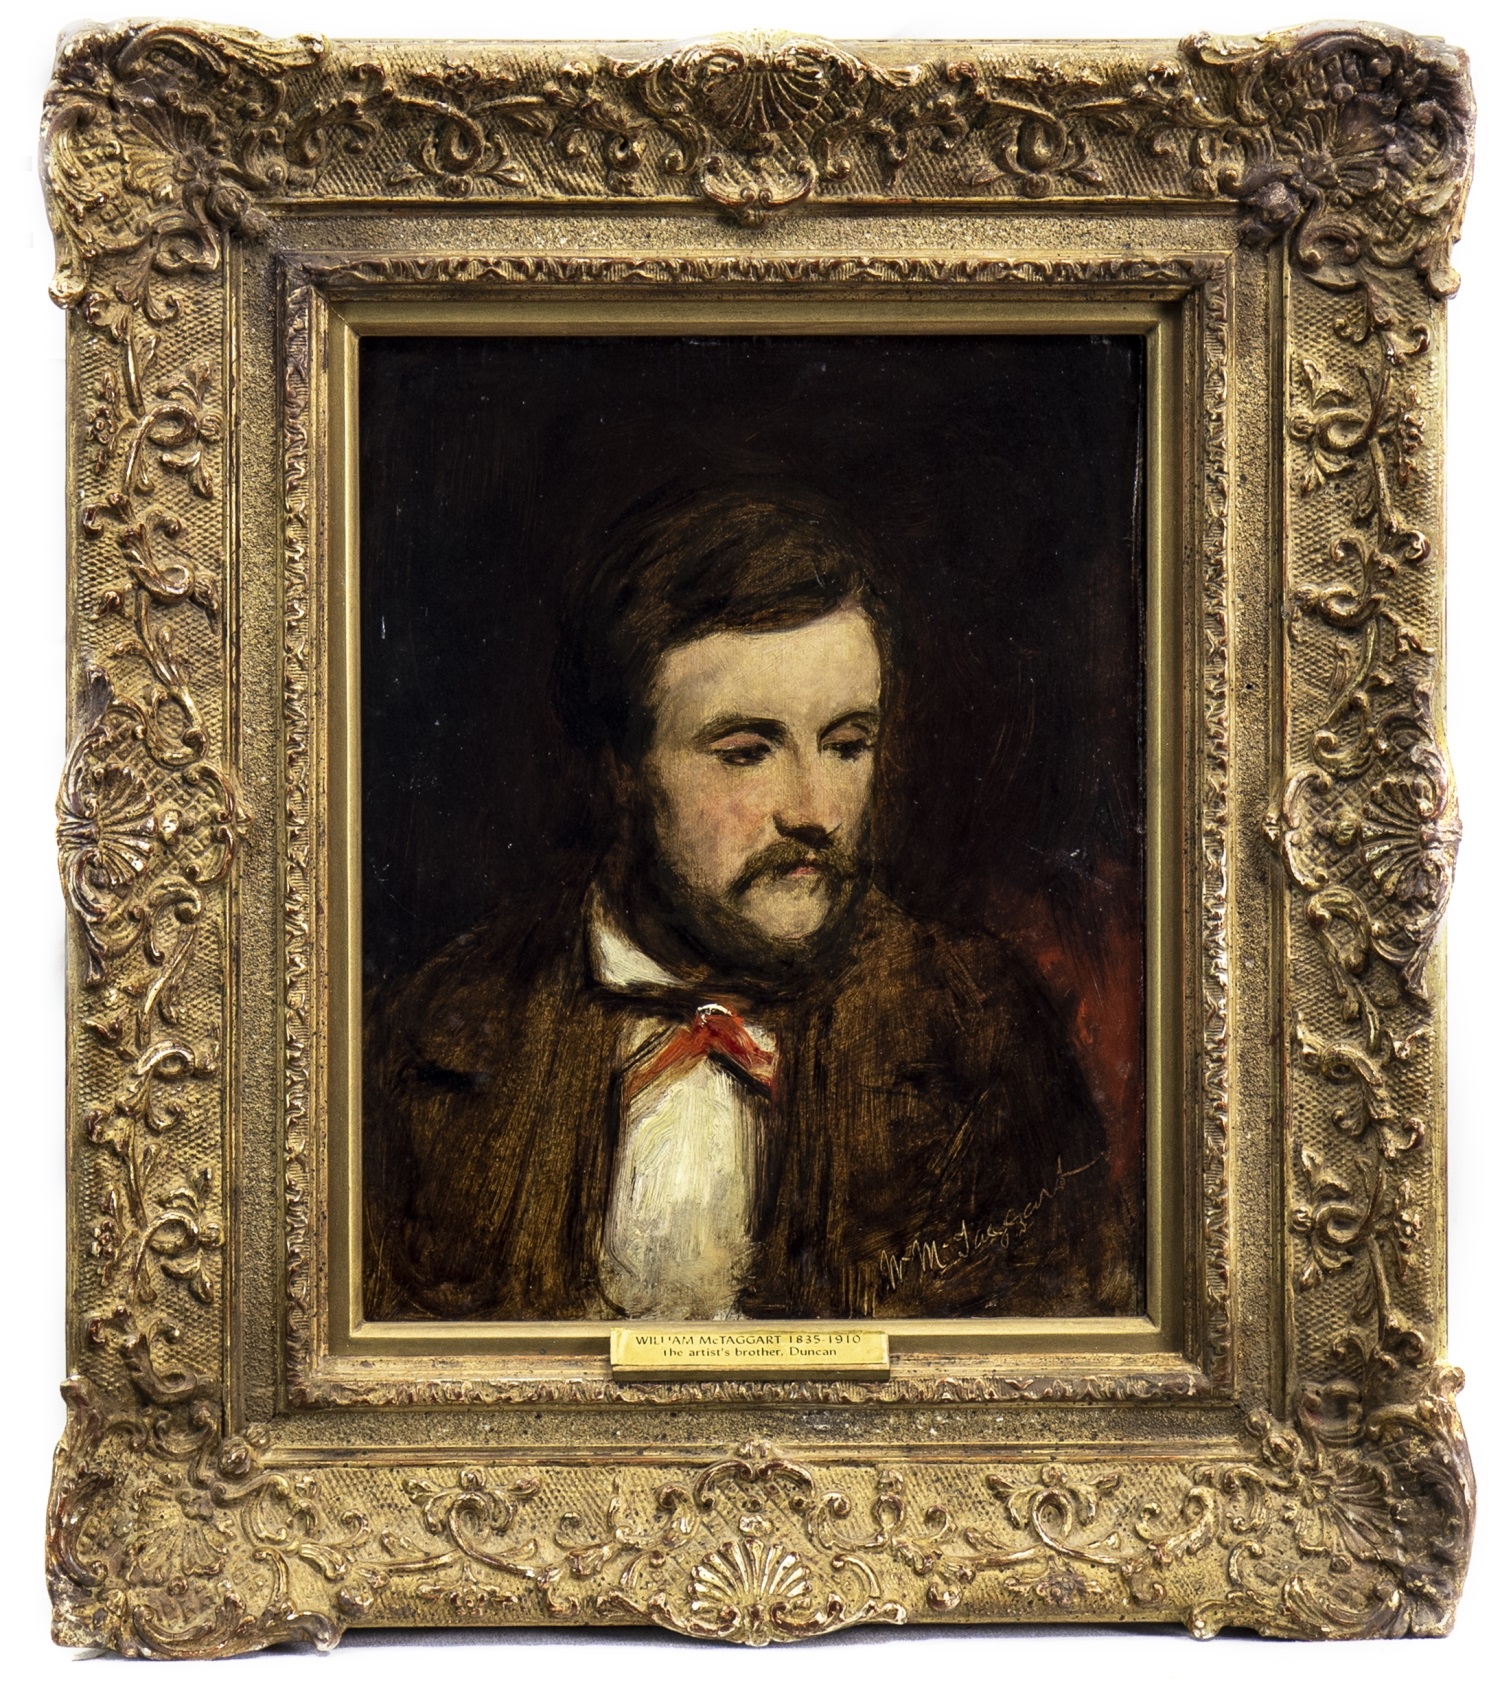 DUNCAN, THE ARTIST'S BROTHER, AN OIL BY WILLIAM MCTAGGART